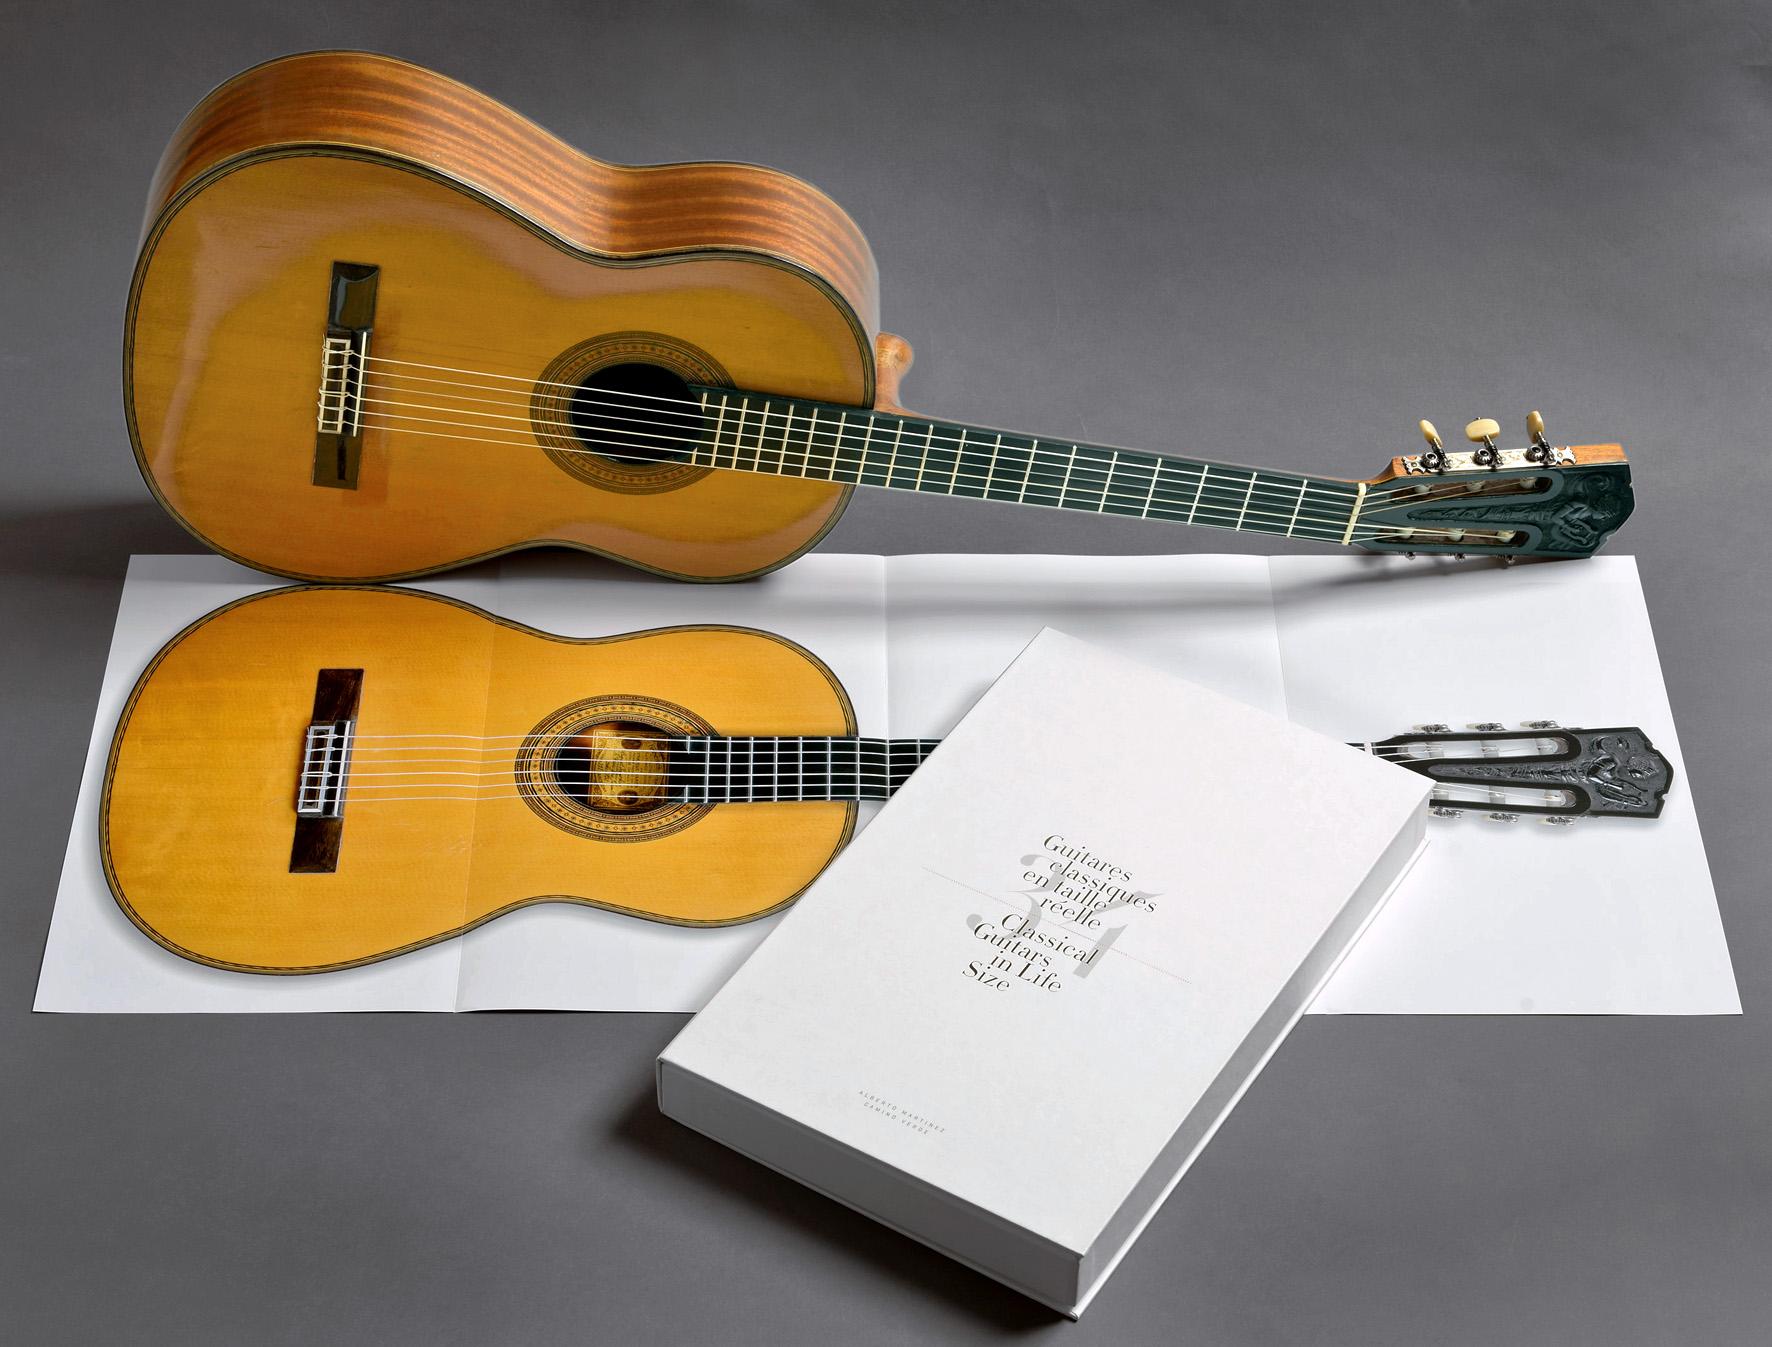 Orfeo - 34 Classical Guitars in Life Size